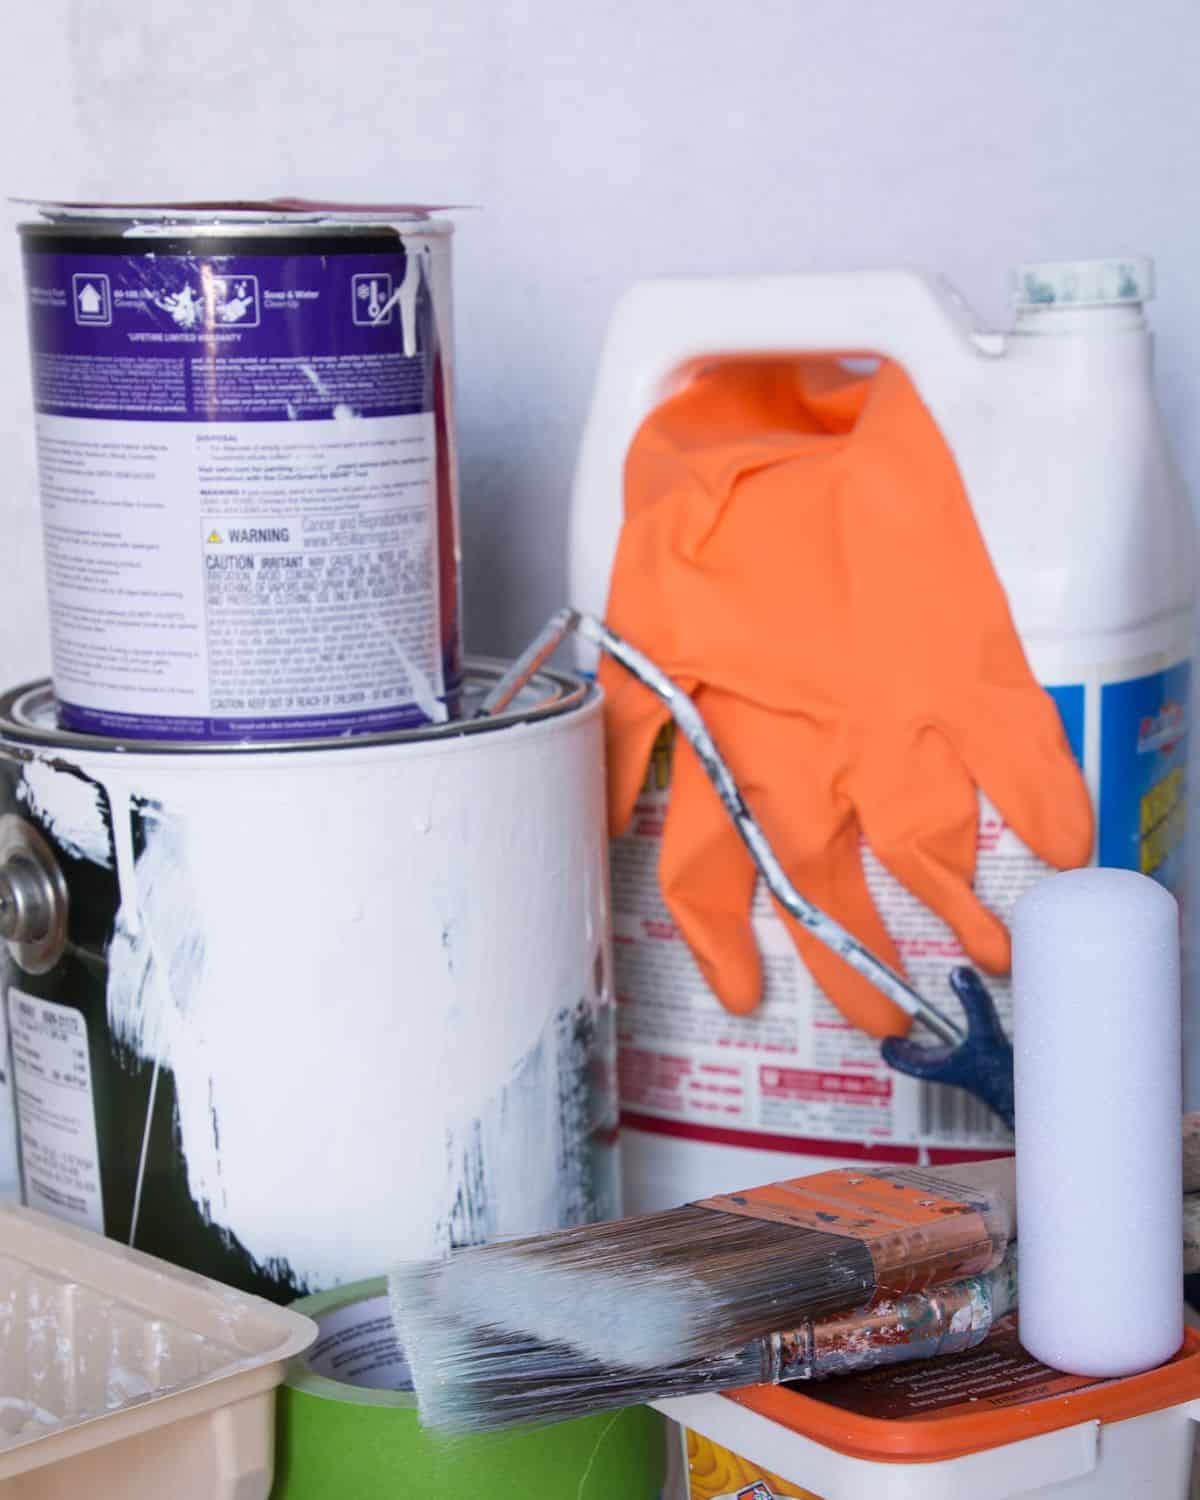 cabinet painting supplies, can of primer, paint, orange rubber glove, small foam roller, wood filler and painter's tape.